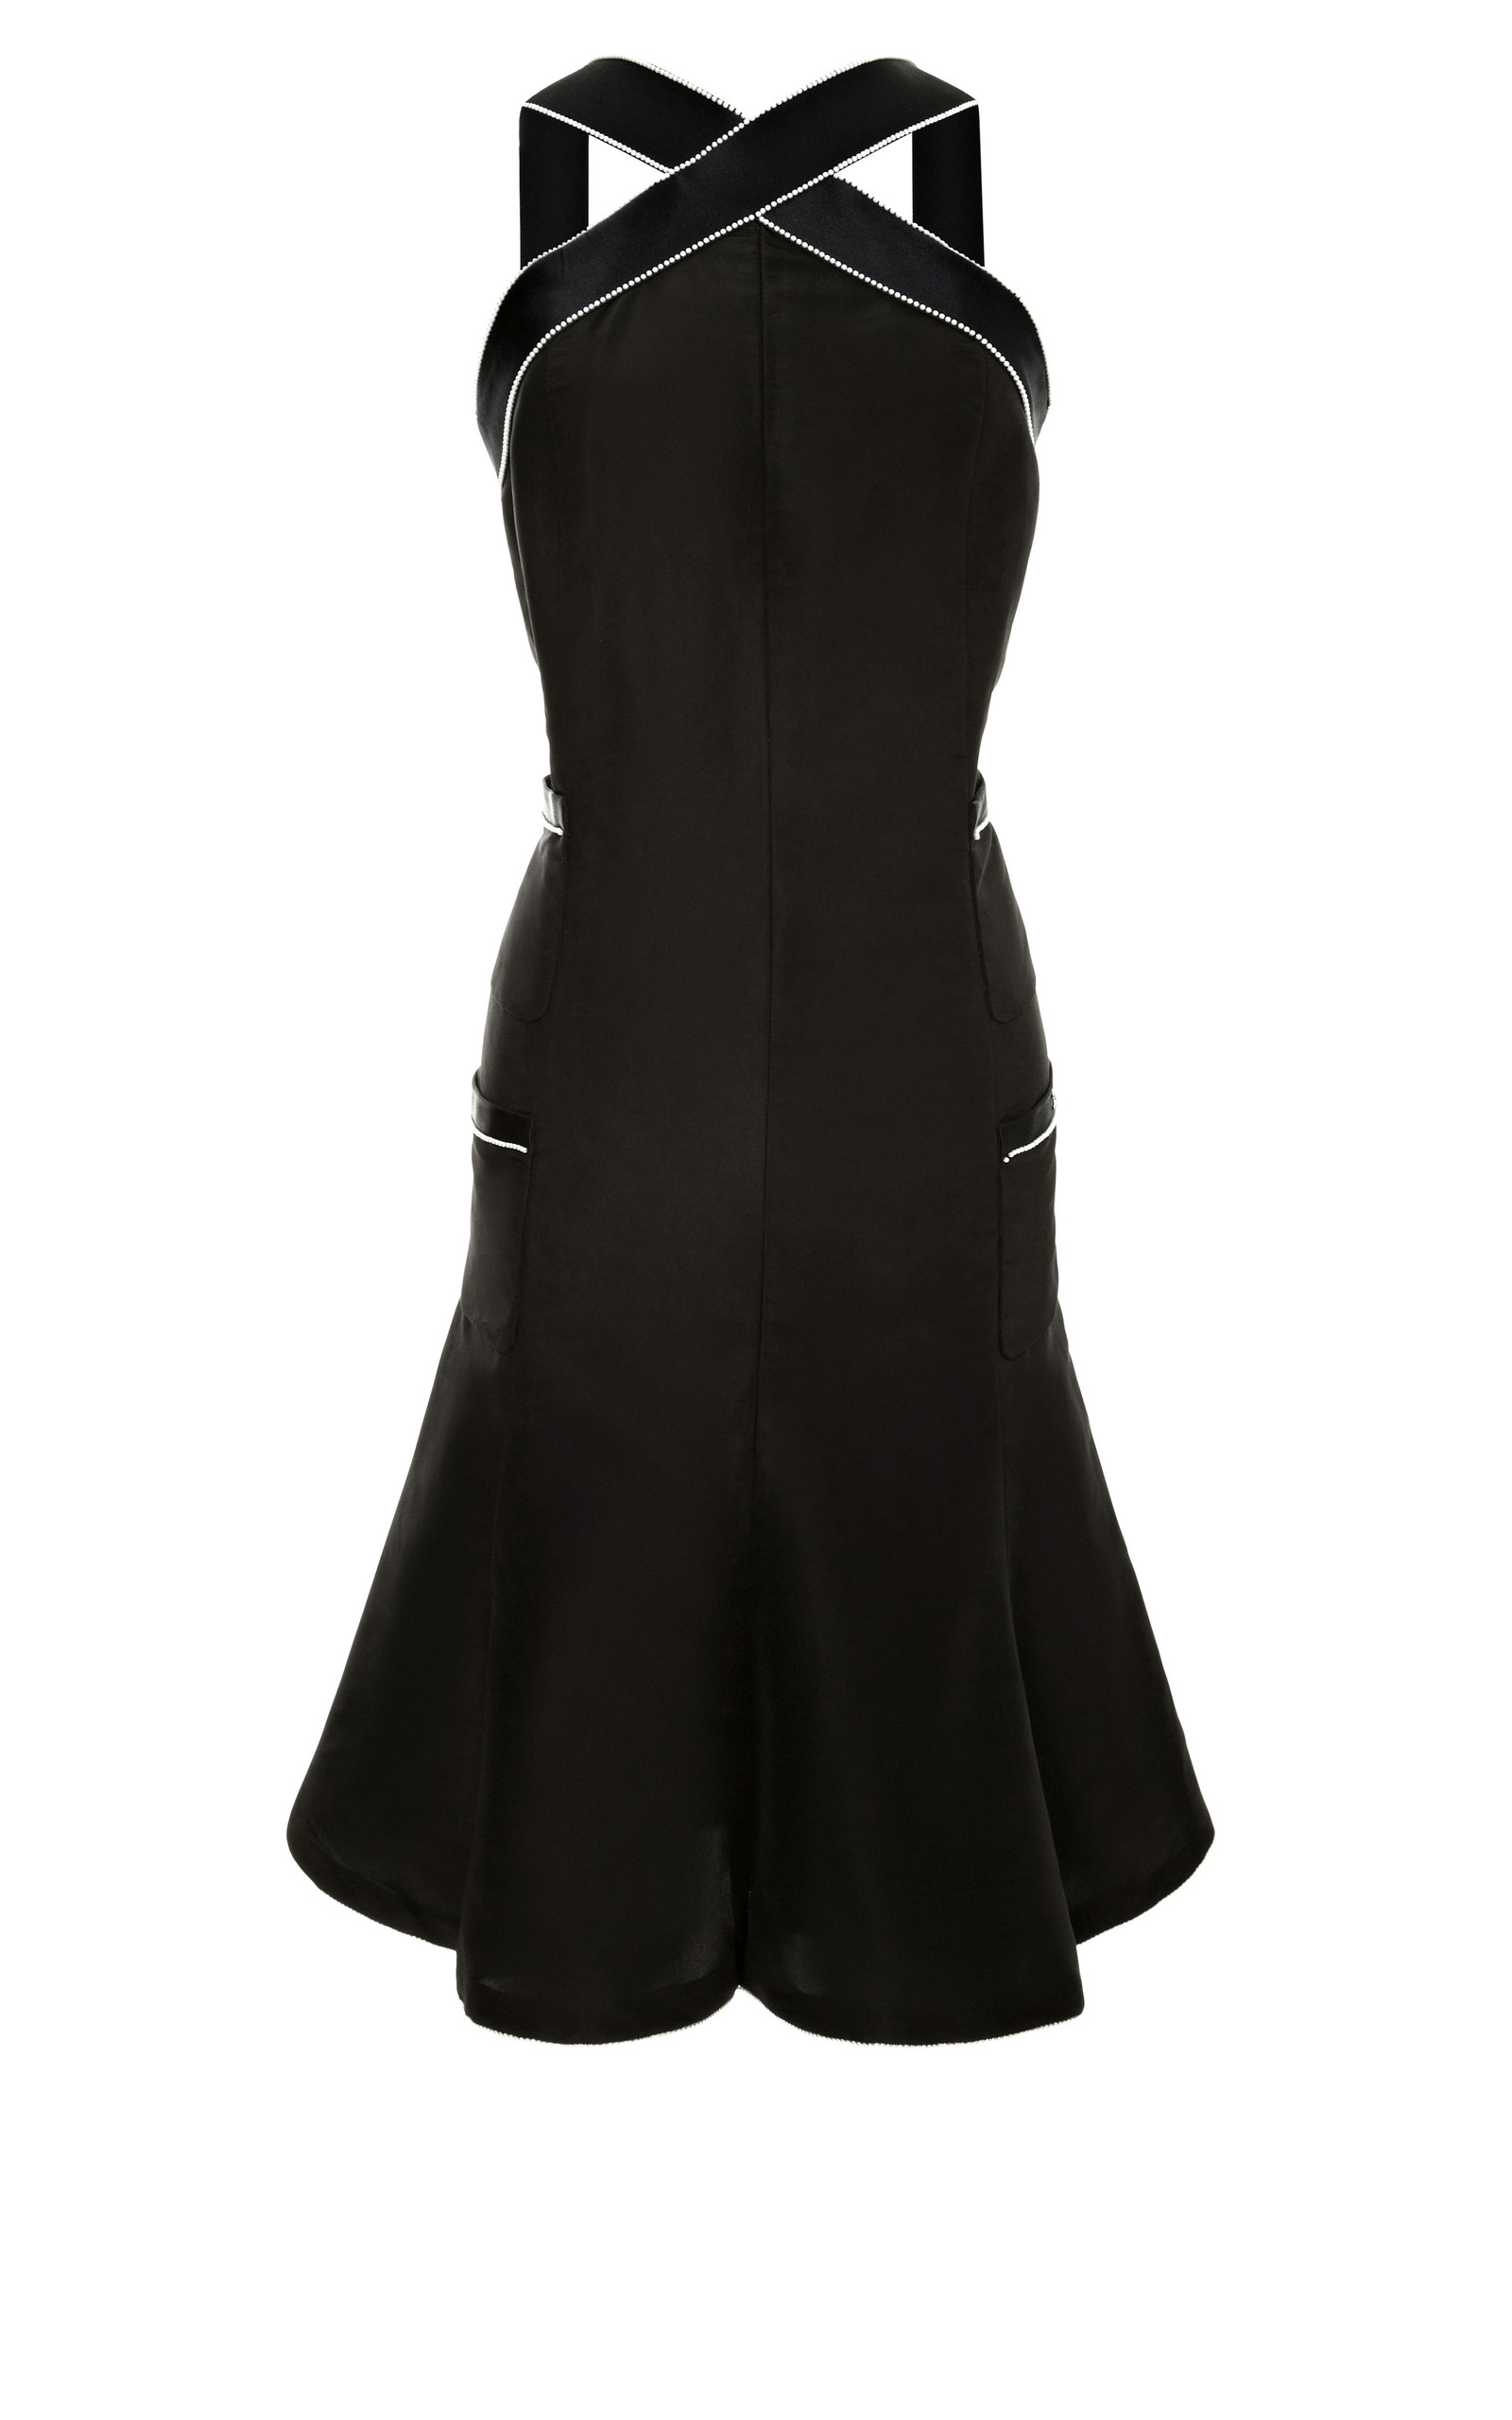 Chanel Black Dress With Pearl Trim From What Goes Moda Operandi